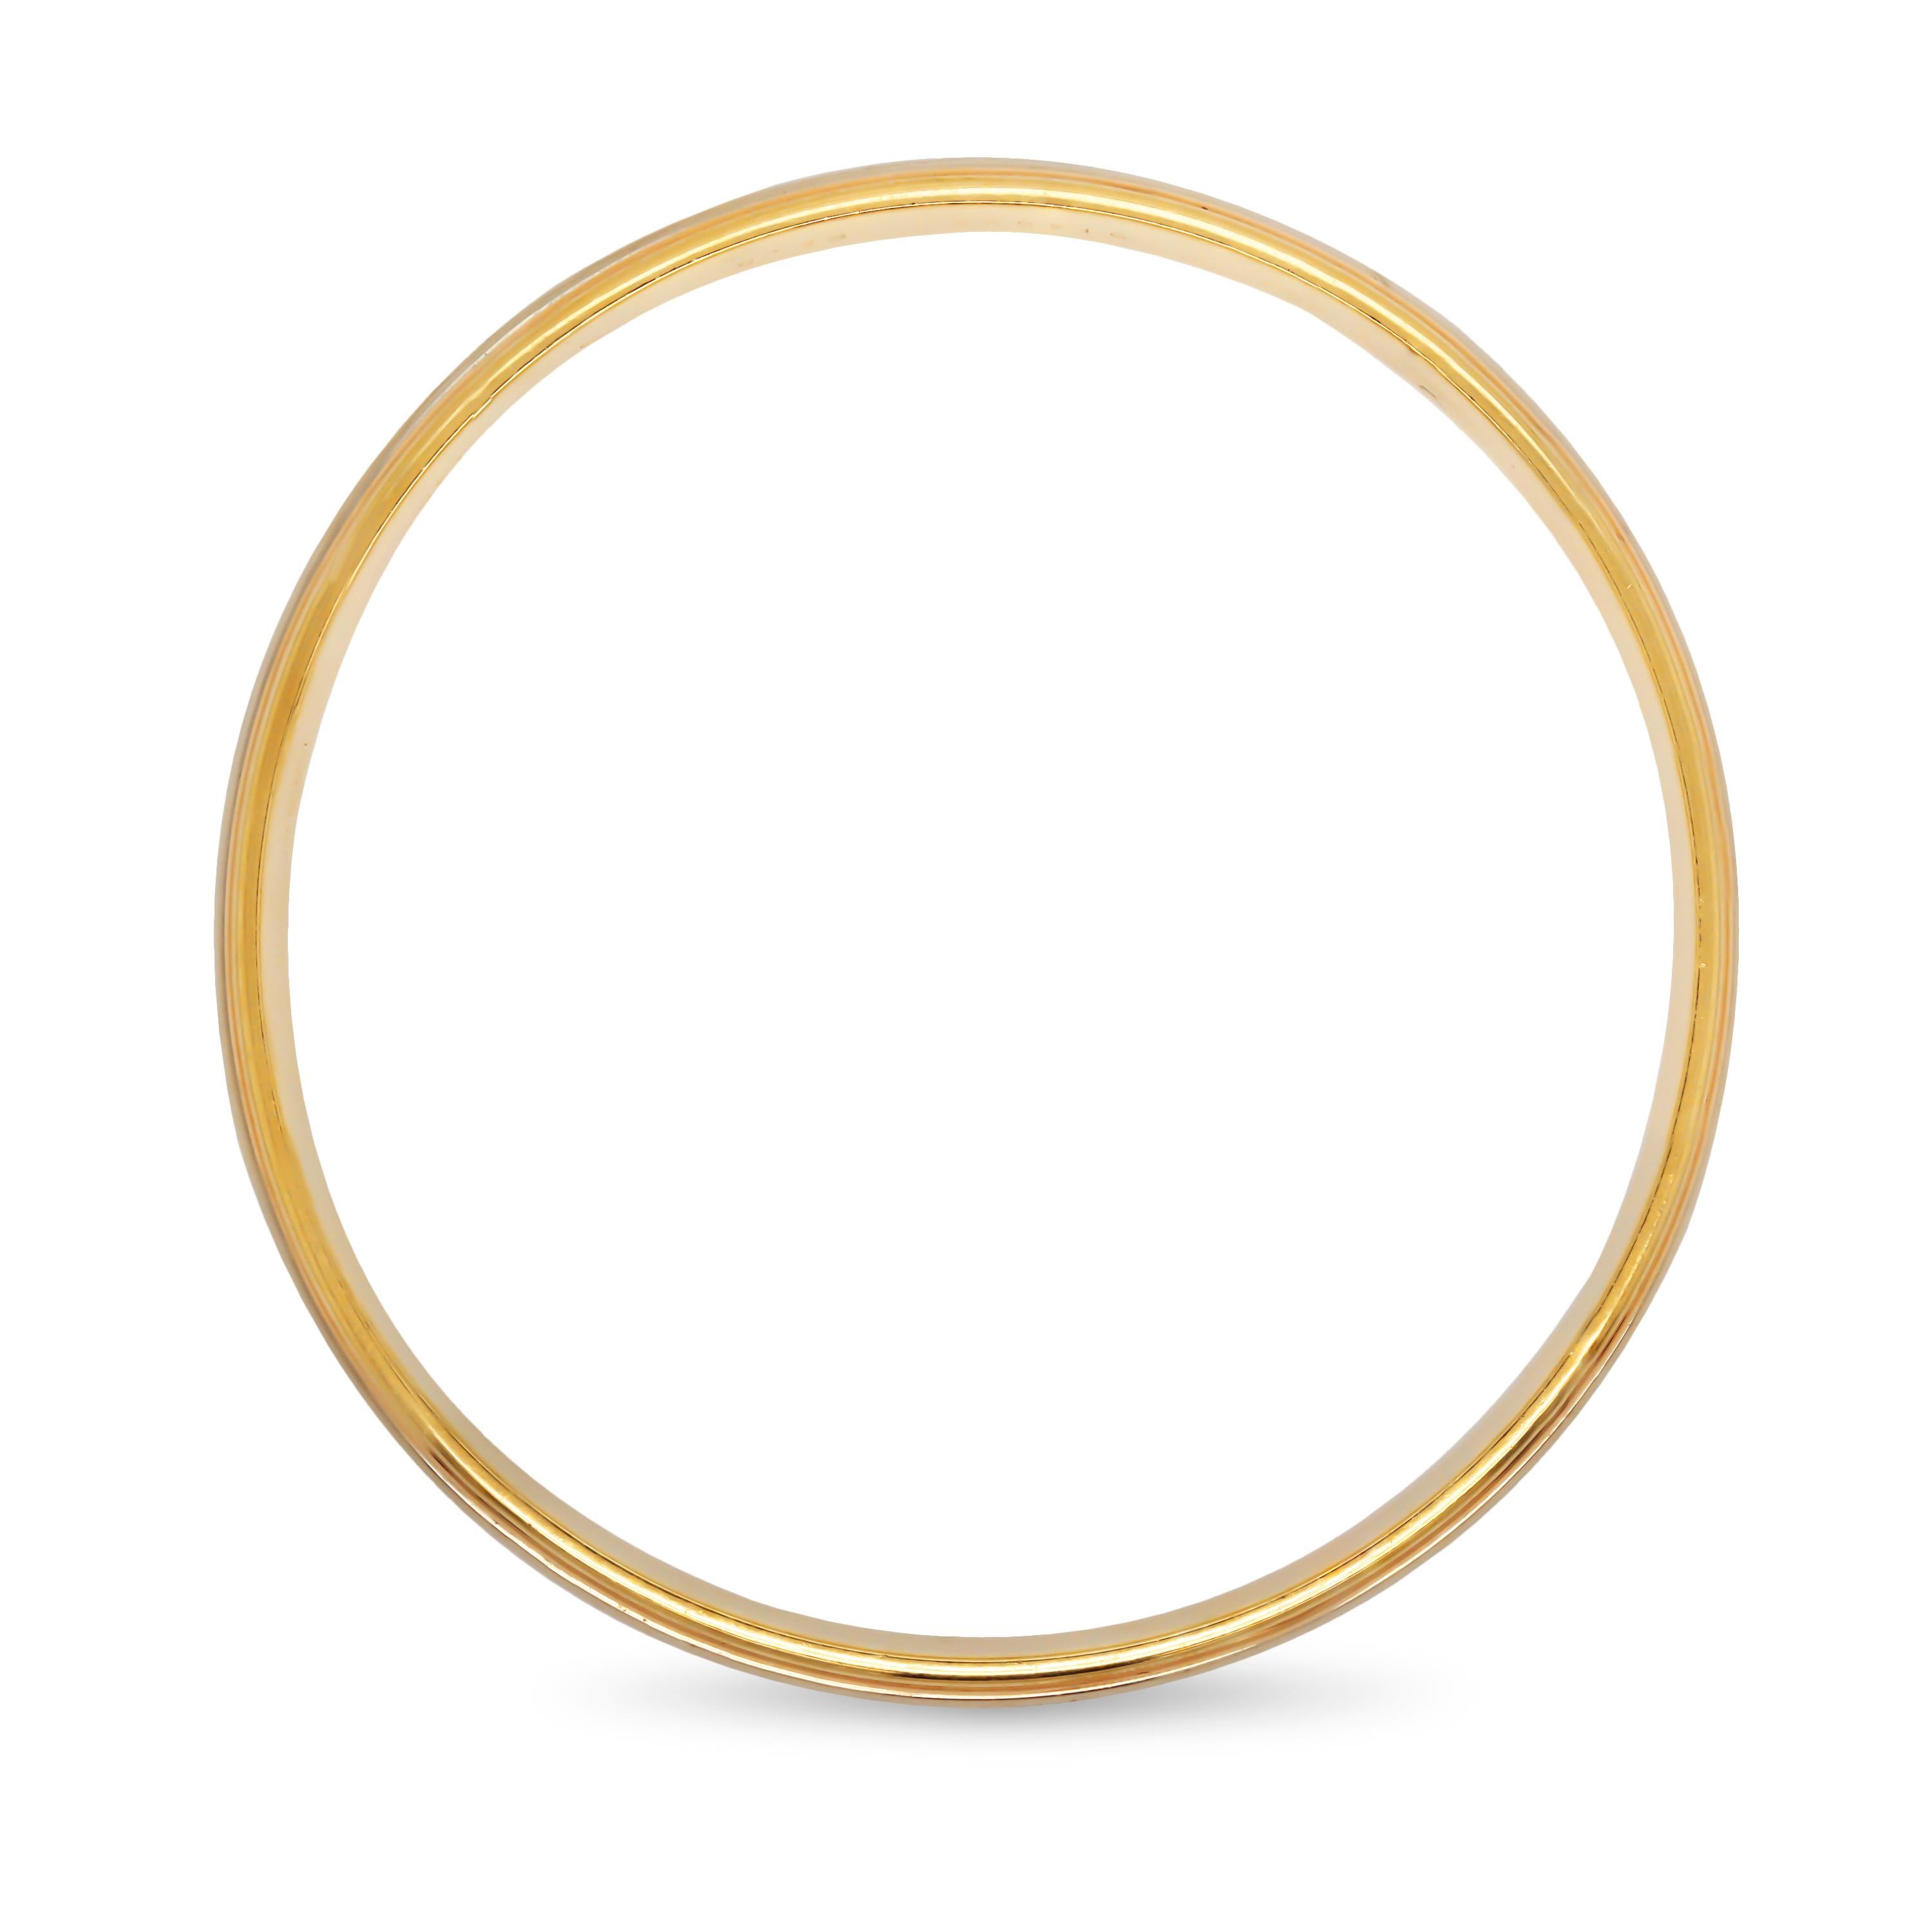 Cartier 18K Tri Color Yellow White Rose Gold Thin Bangle Bracelet

This is an original by Cartier.

Size 8. (8 inches length). 0.30 inch width.